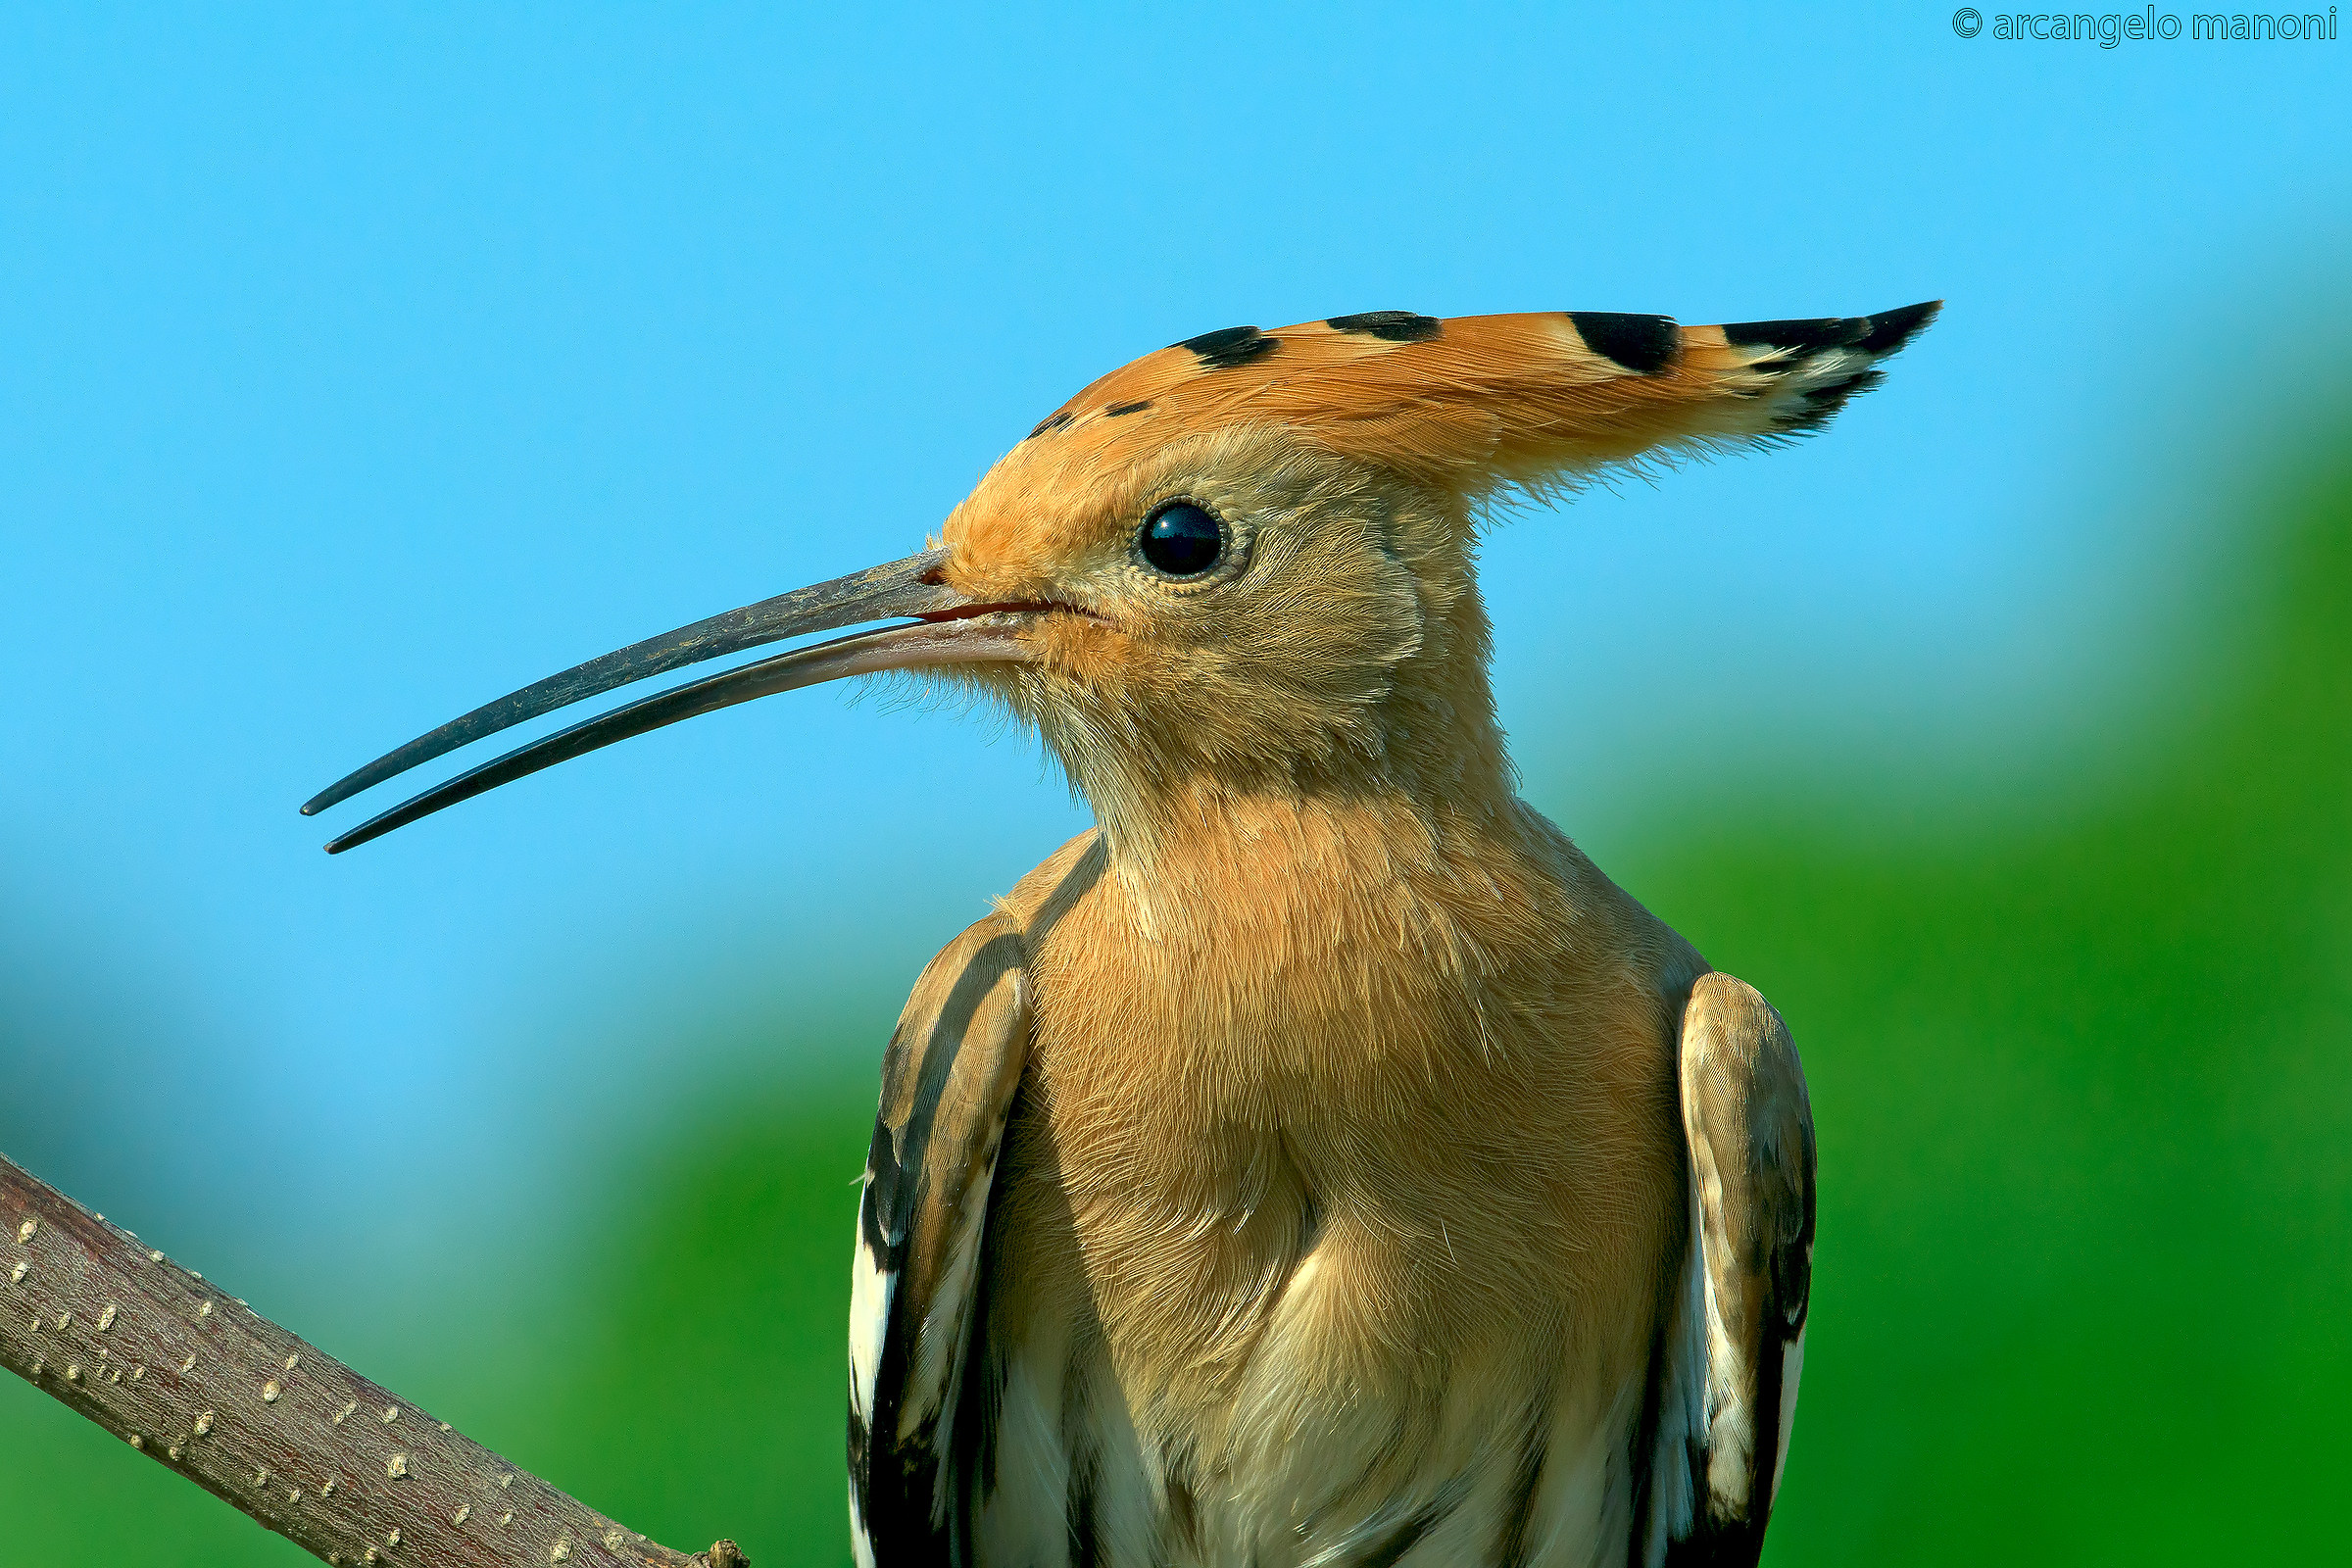 Being face to face with the hoopoe...